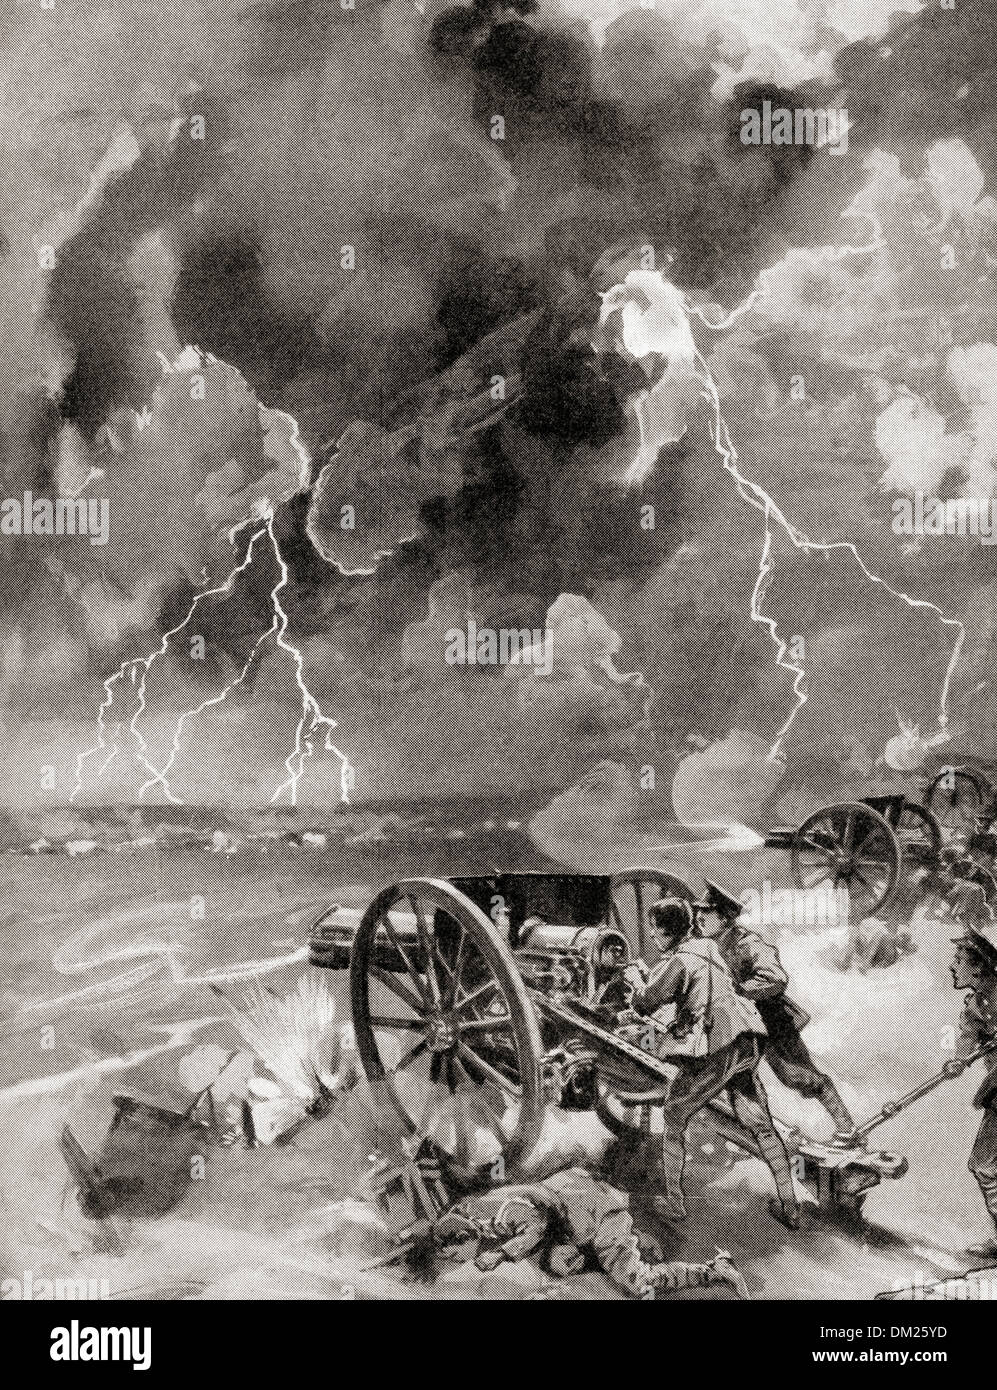 British soldiers fighting in a thunderstorm at The First Battle of the Marne, France during WWI. Stock Photo